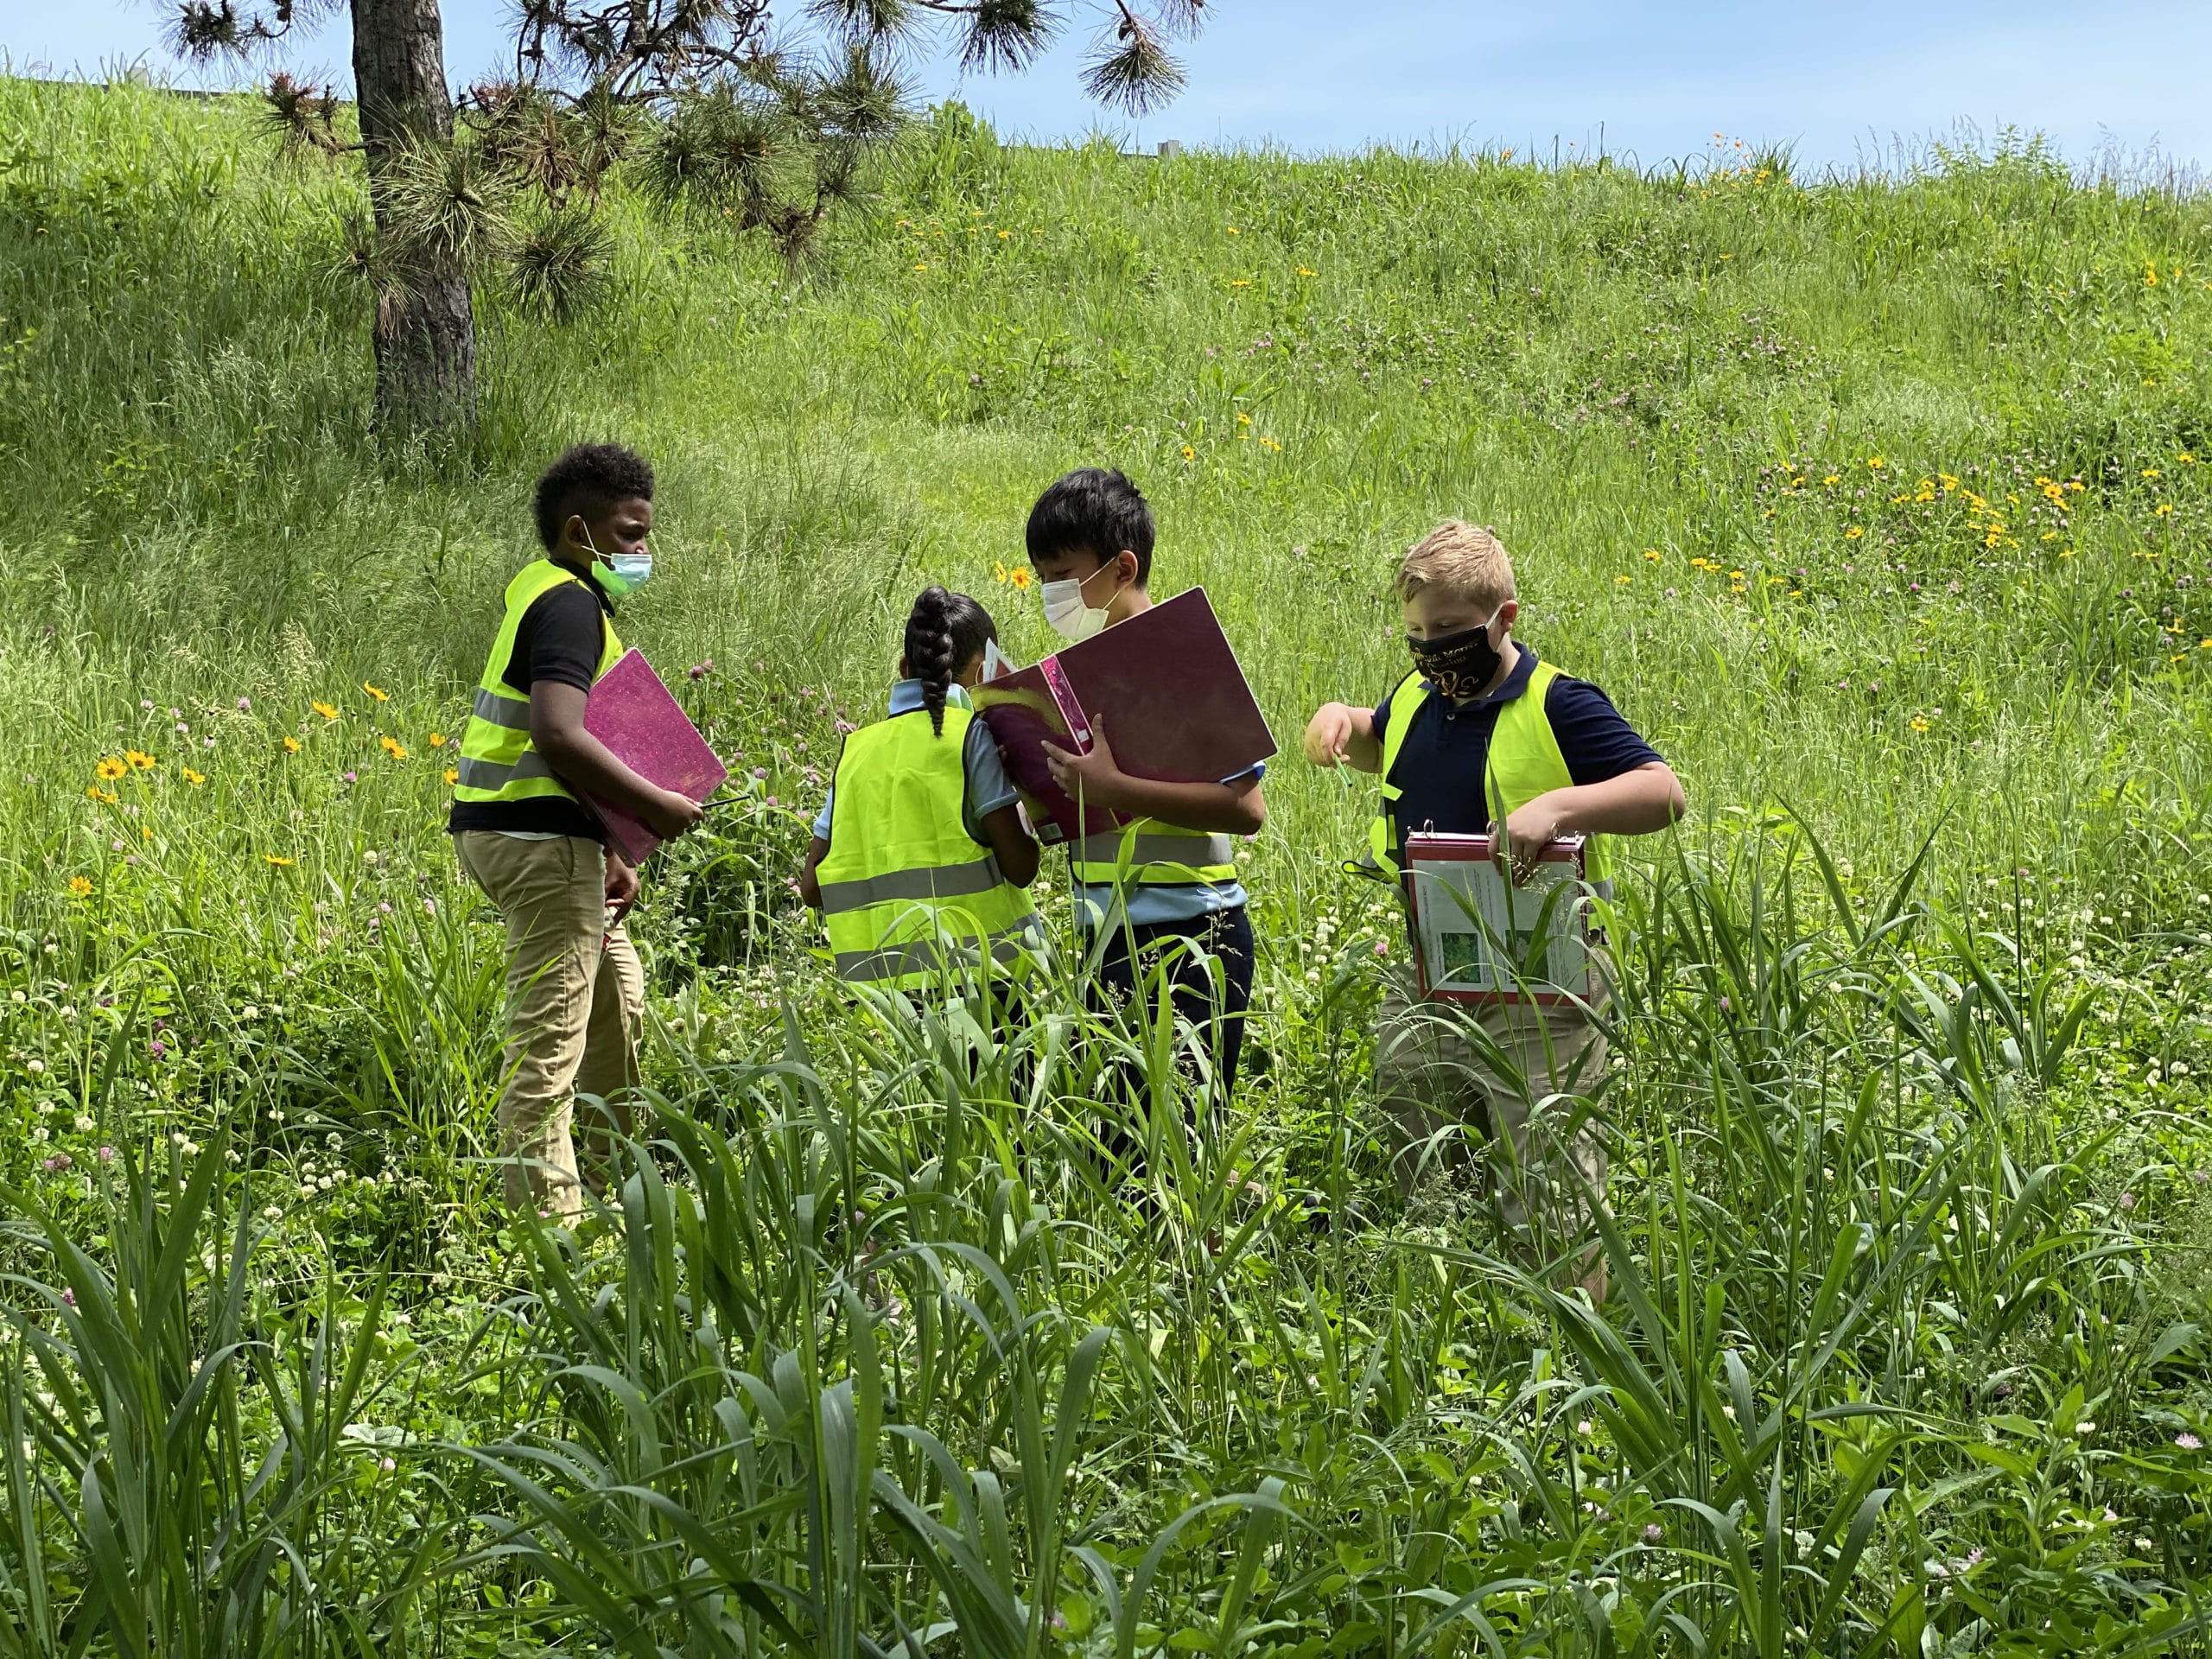 Four children carrying field notebooks inspect the field on the GHV embankment